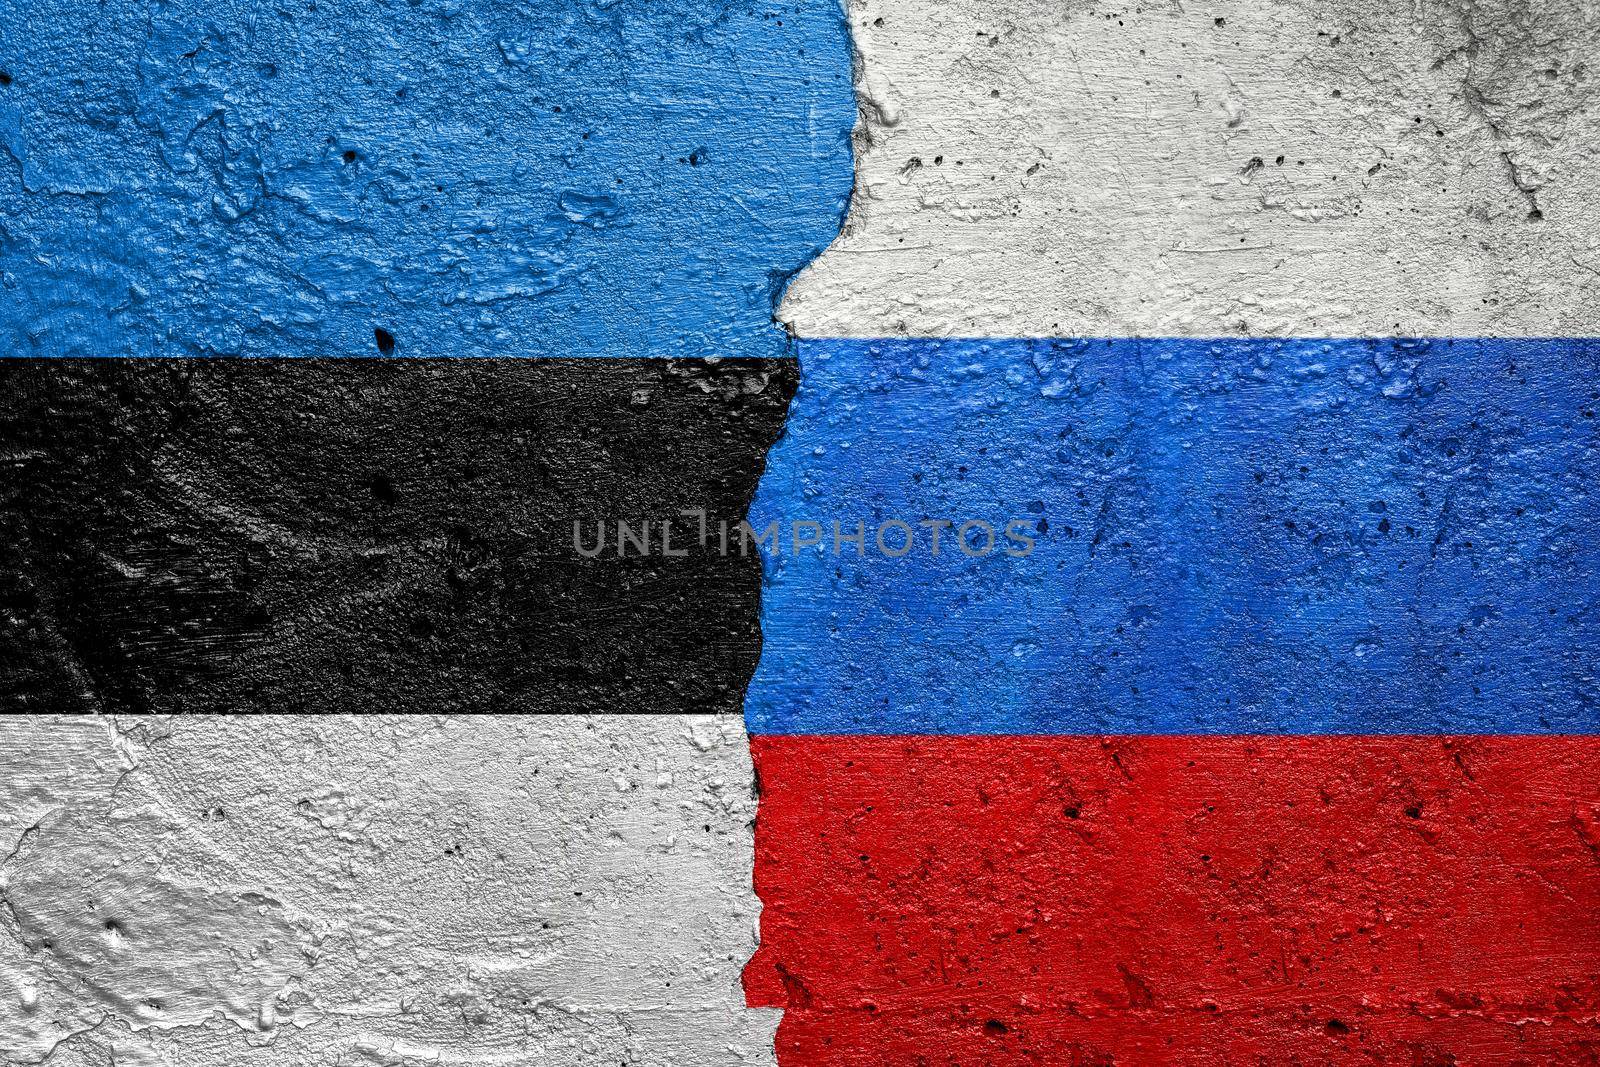 Estonia vs Russia - Cracked concrete wall painted with a Estonian flag on the left and a Russian flag on the right stock photo by adamr